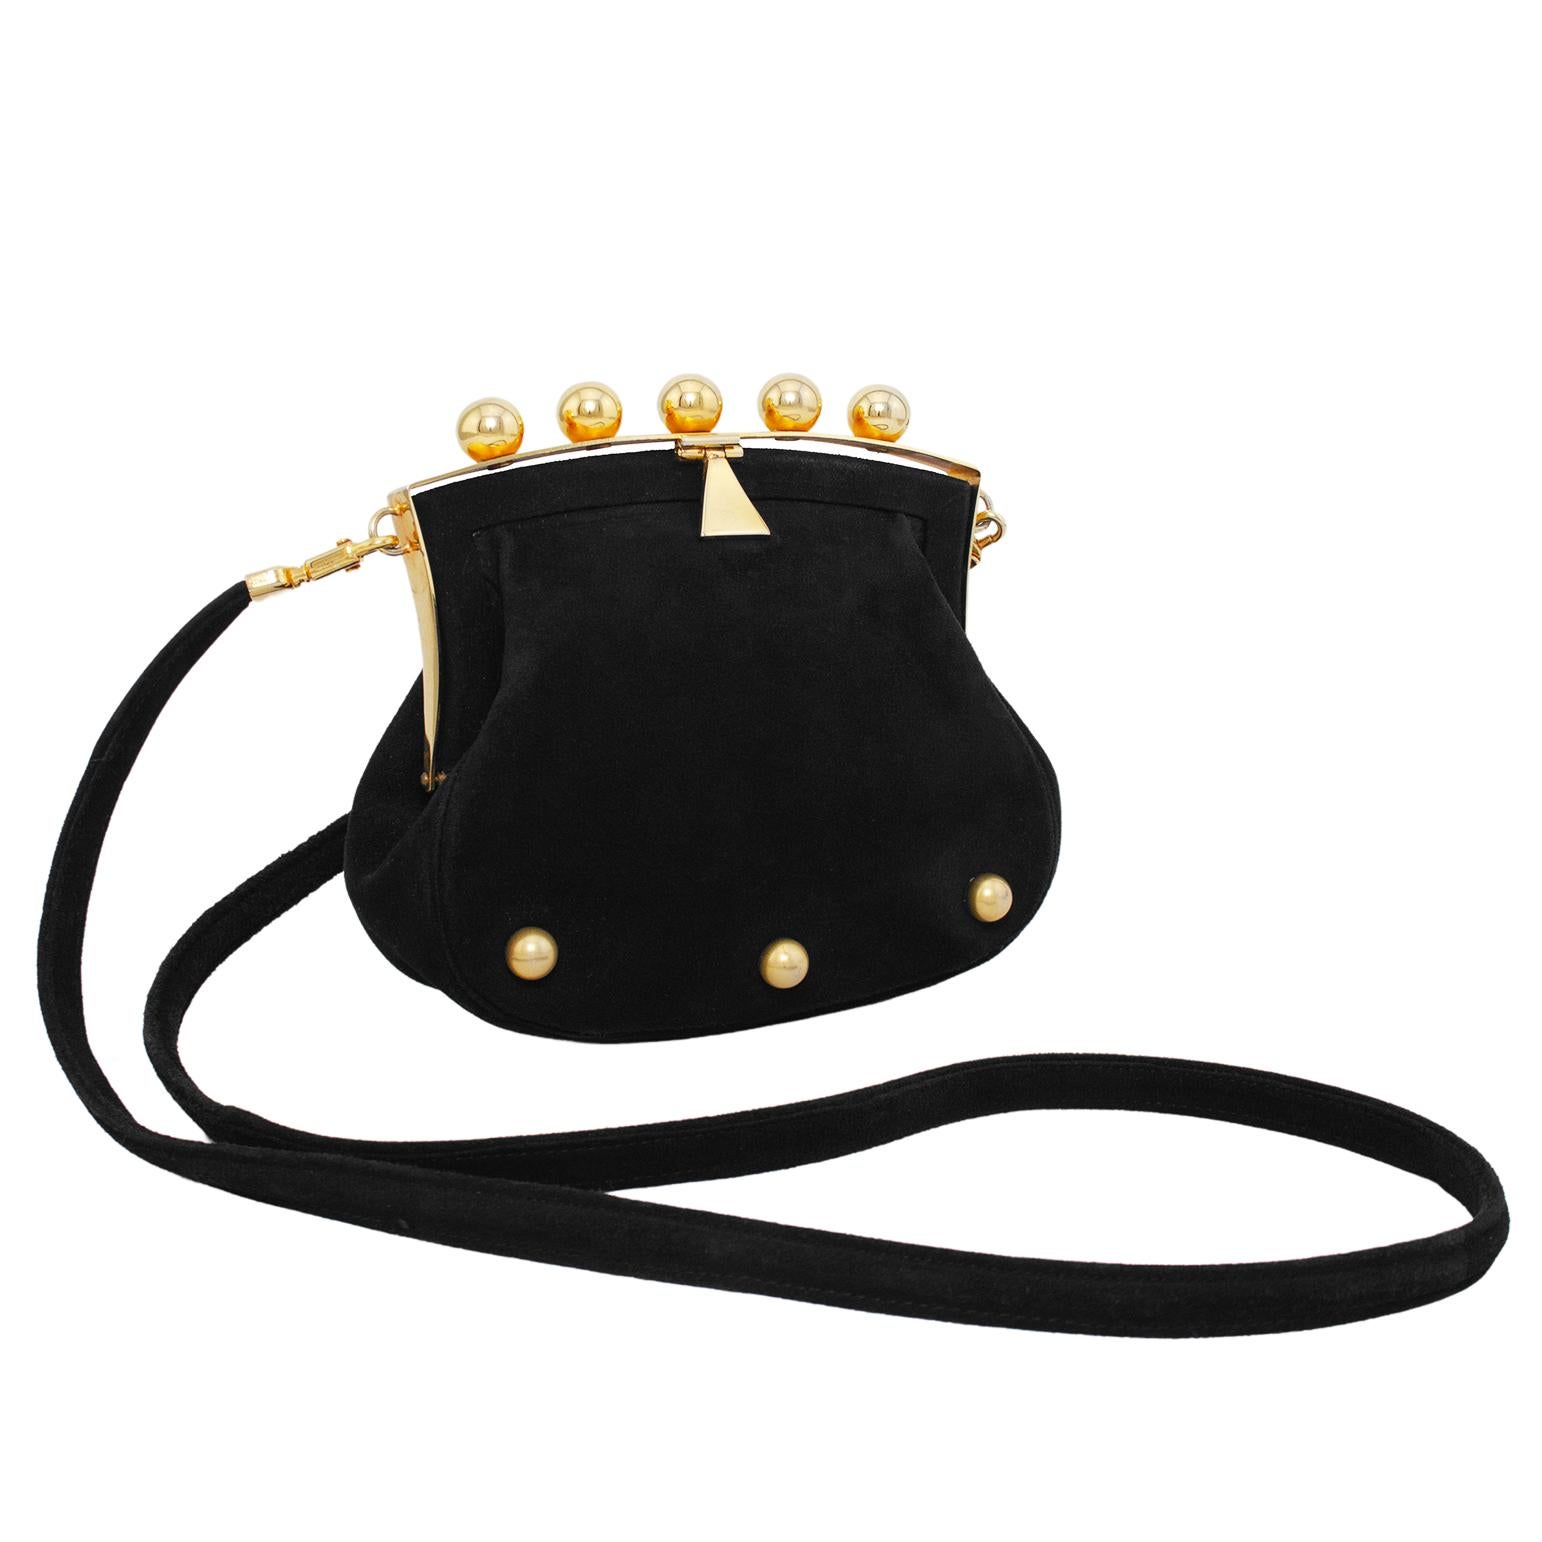 Very unique and interesting Phillippe Model frame style bag from the 1980s. Black suede with three gold tone metal studs across the bottom of the front. The top features a substantial gold tone metal frame with five gold spheres. Lever snap closure.